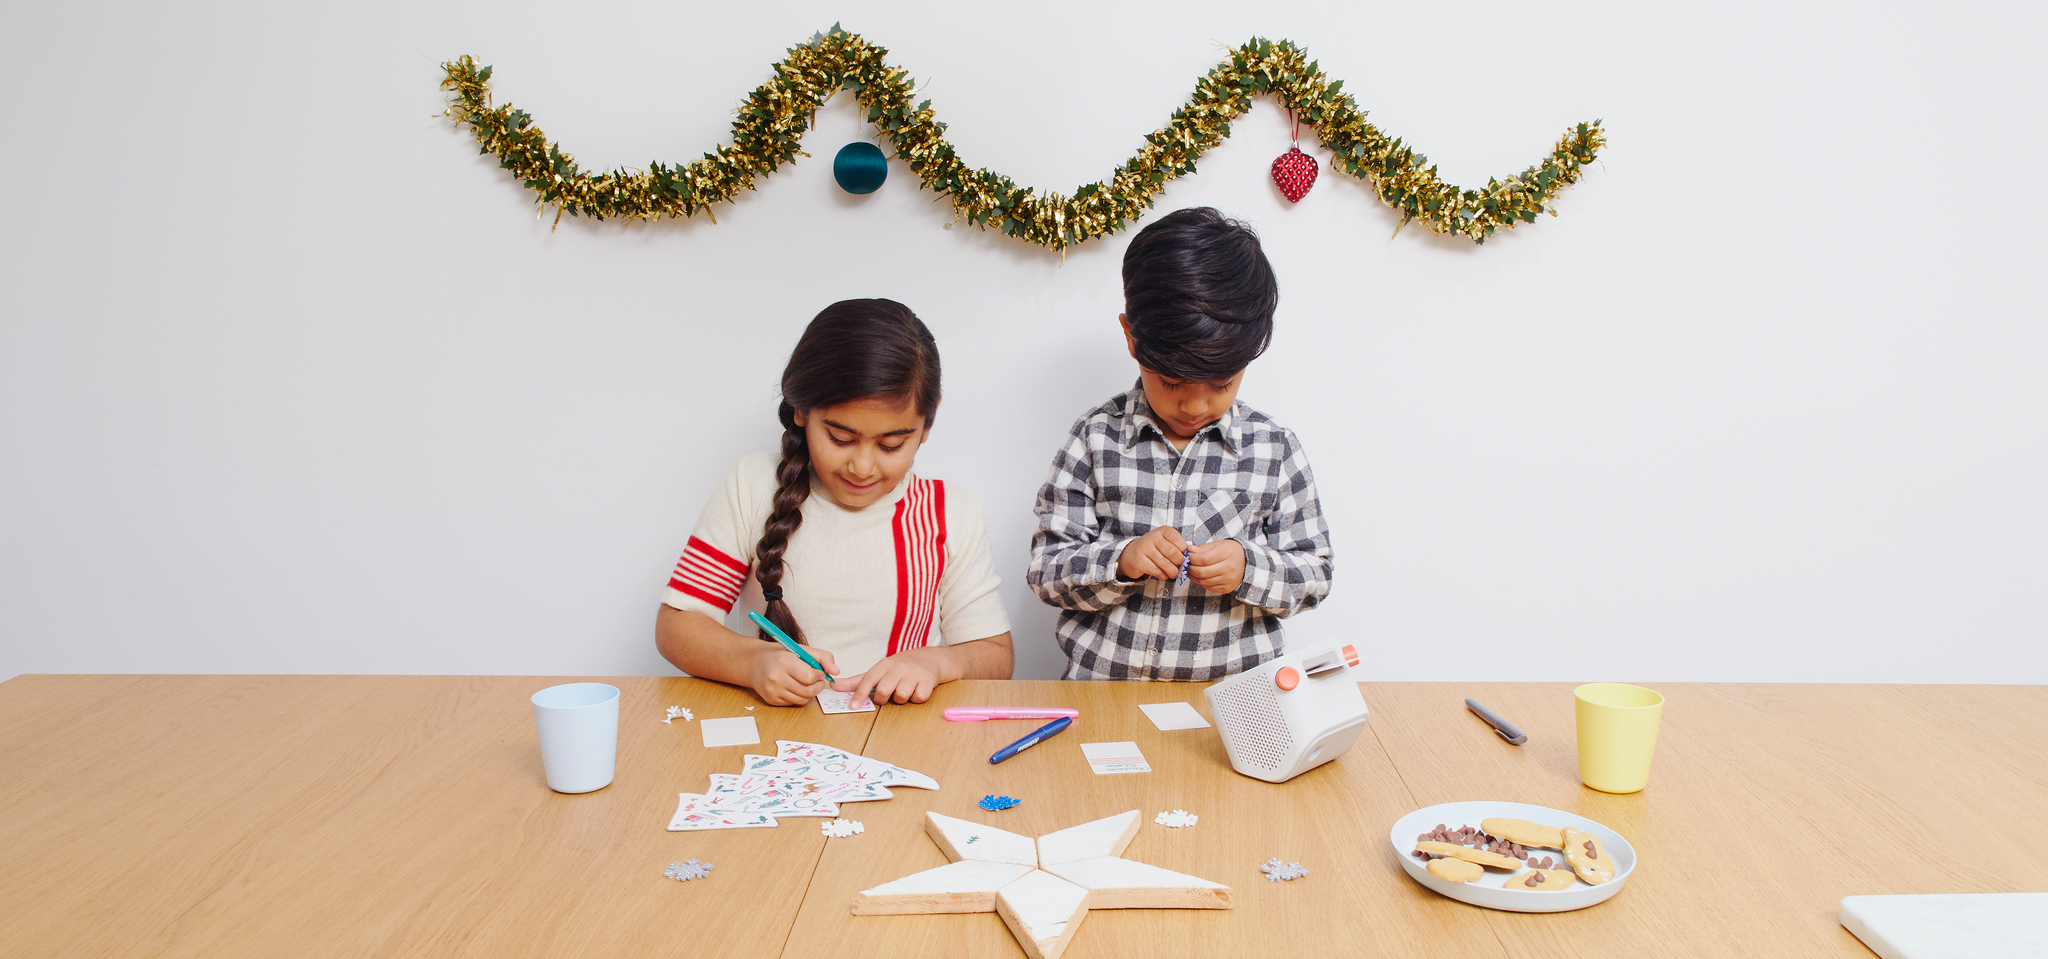 Get Crafty with Make Your Own Cards This Festive Season – Yoto USA